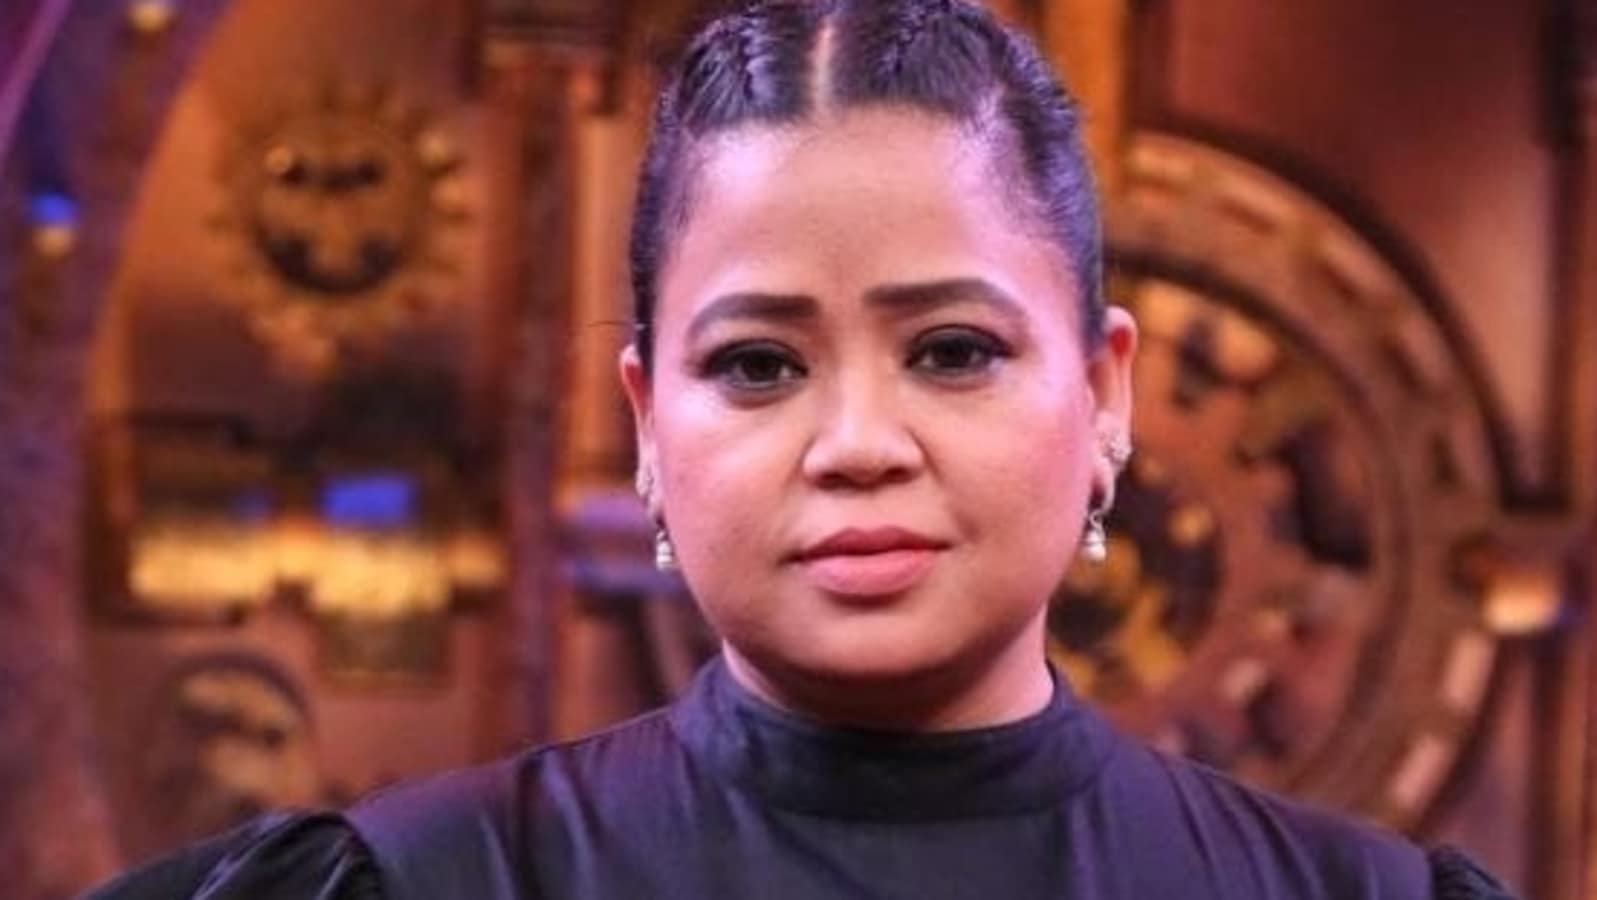 Bharti Singh wishes she could have a daughter soon: ‘I will have to wait, but Gola has to have a sibling’